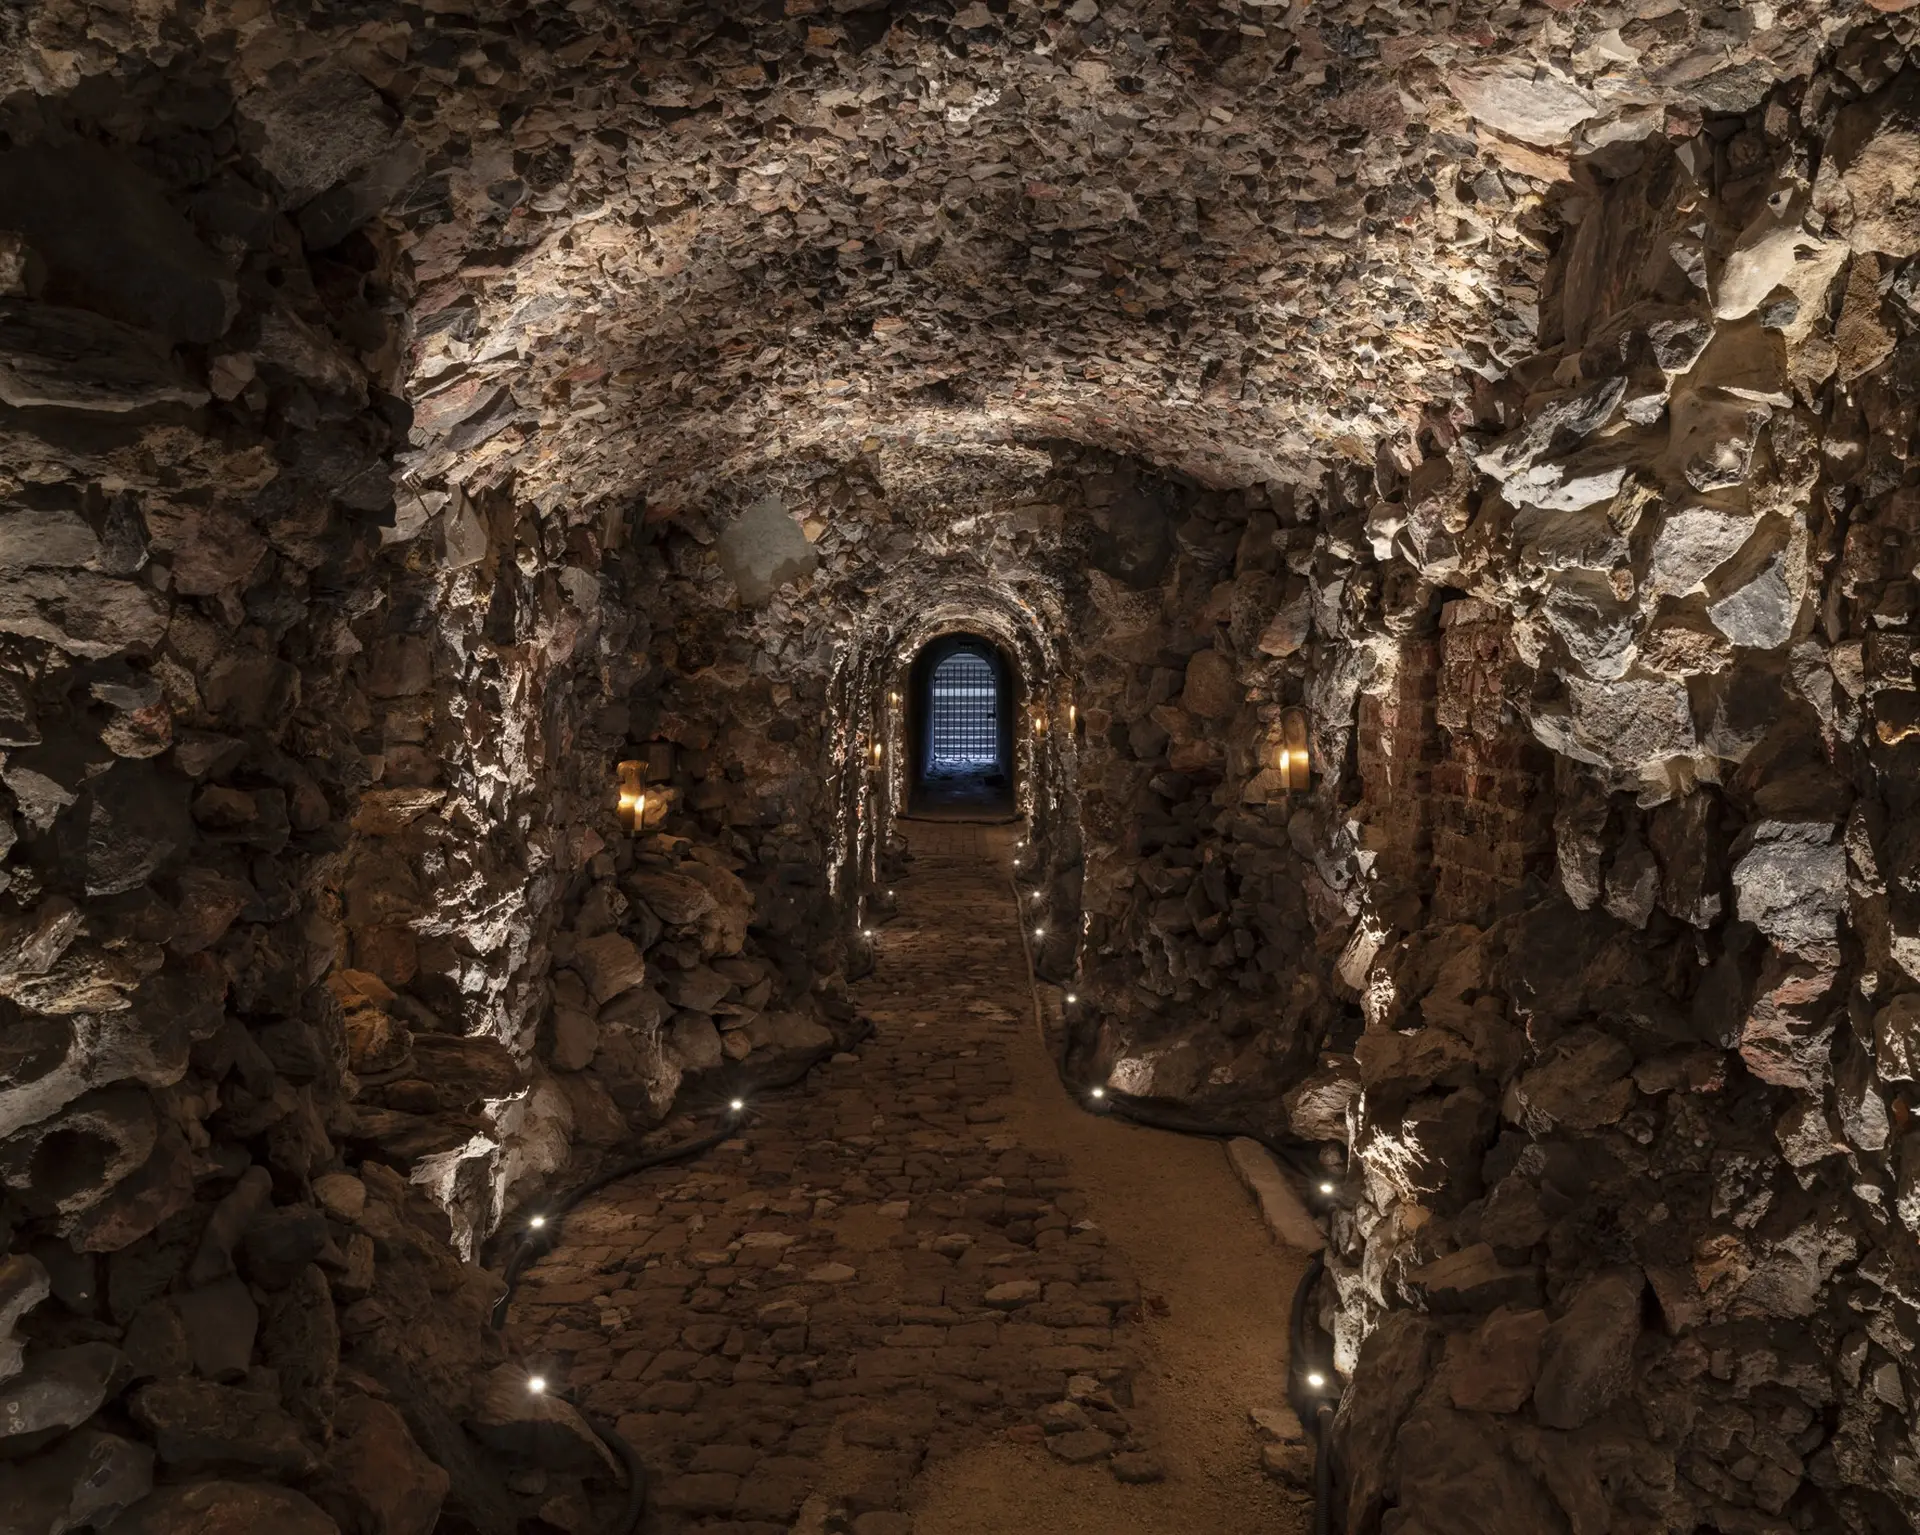 Restoration and Conservation of Alexander Pope's Grotto